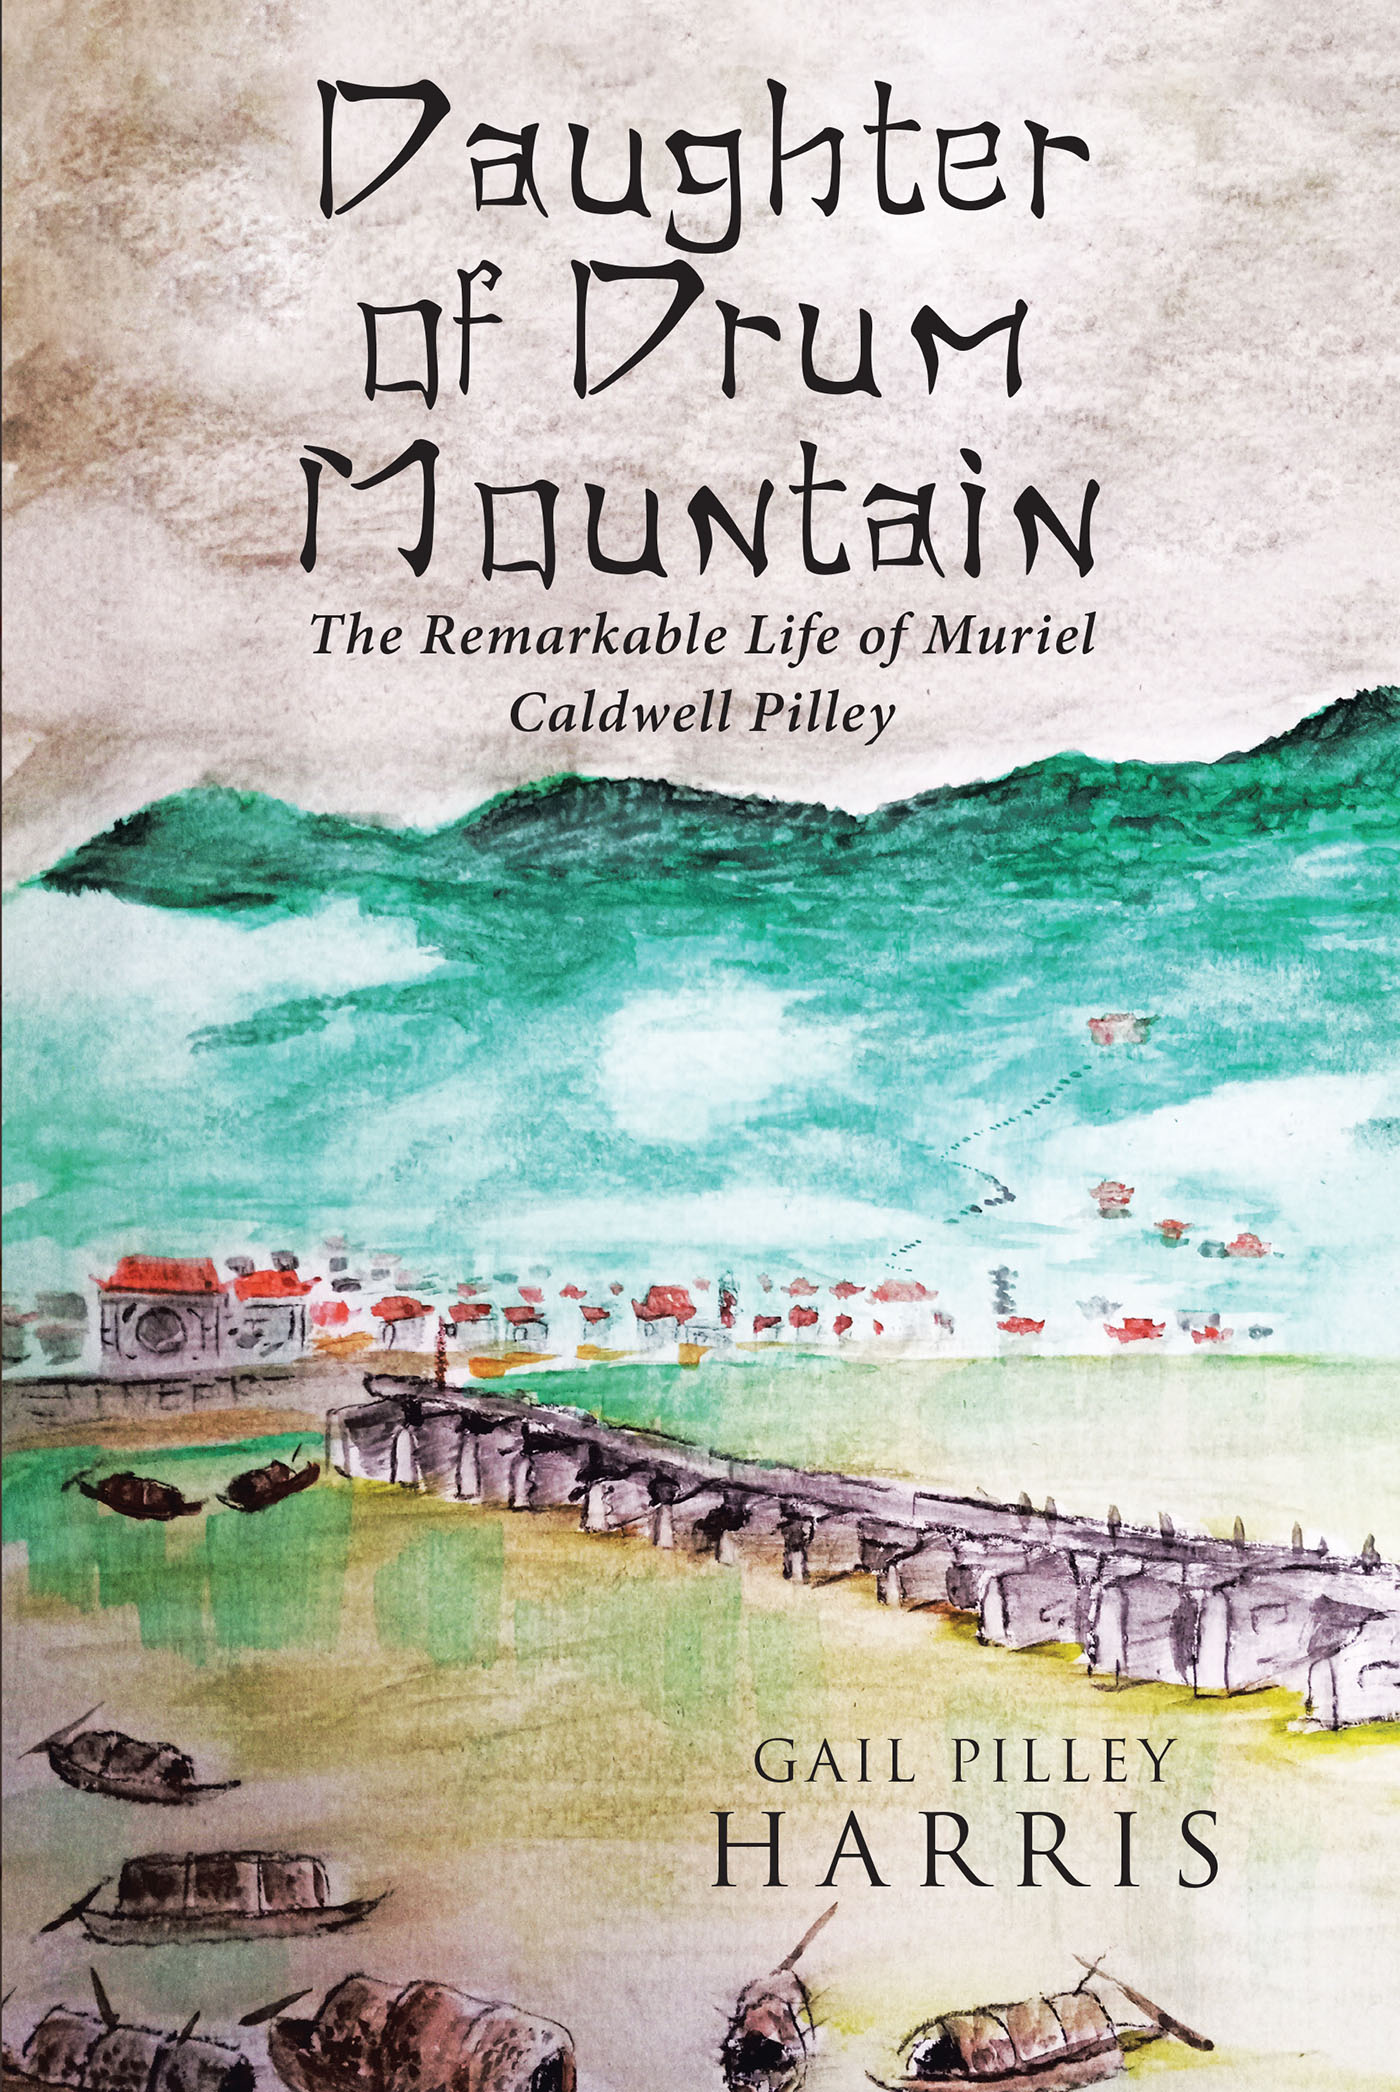 Author Gail Pilley Harris’ New Book, “Daughter of Drum Mountain: The Remarkable Life of Muriel Caldwell Pilley,” Shares the Fascinating Story of the Author’s Family